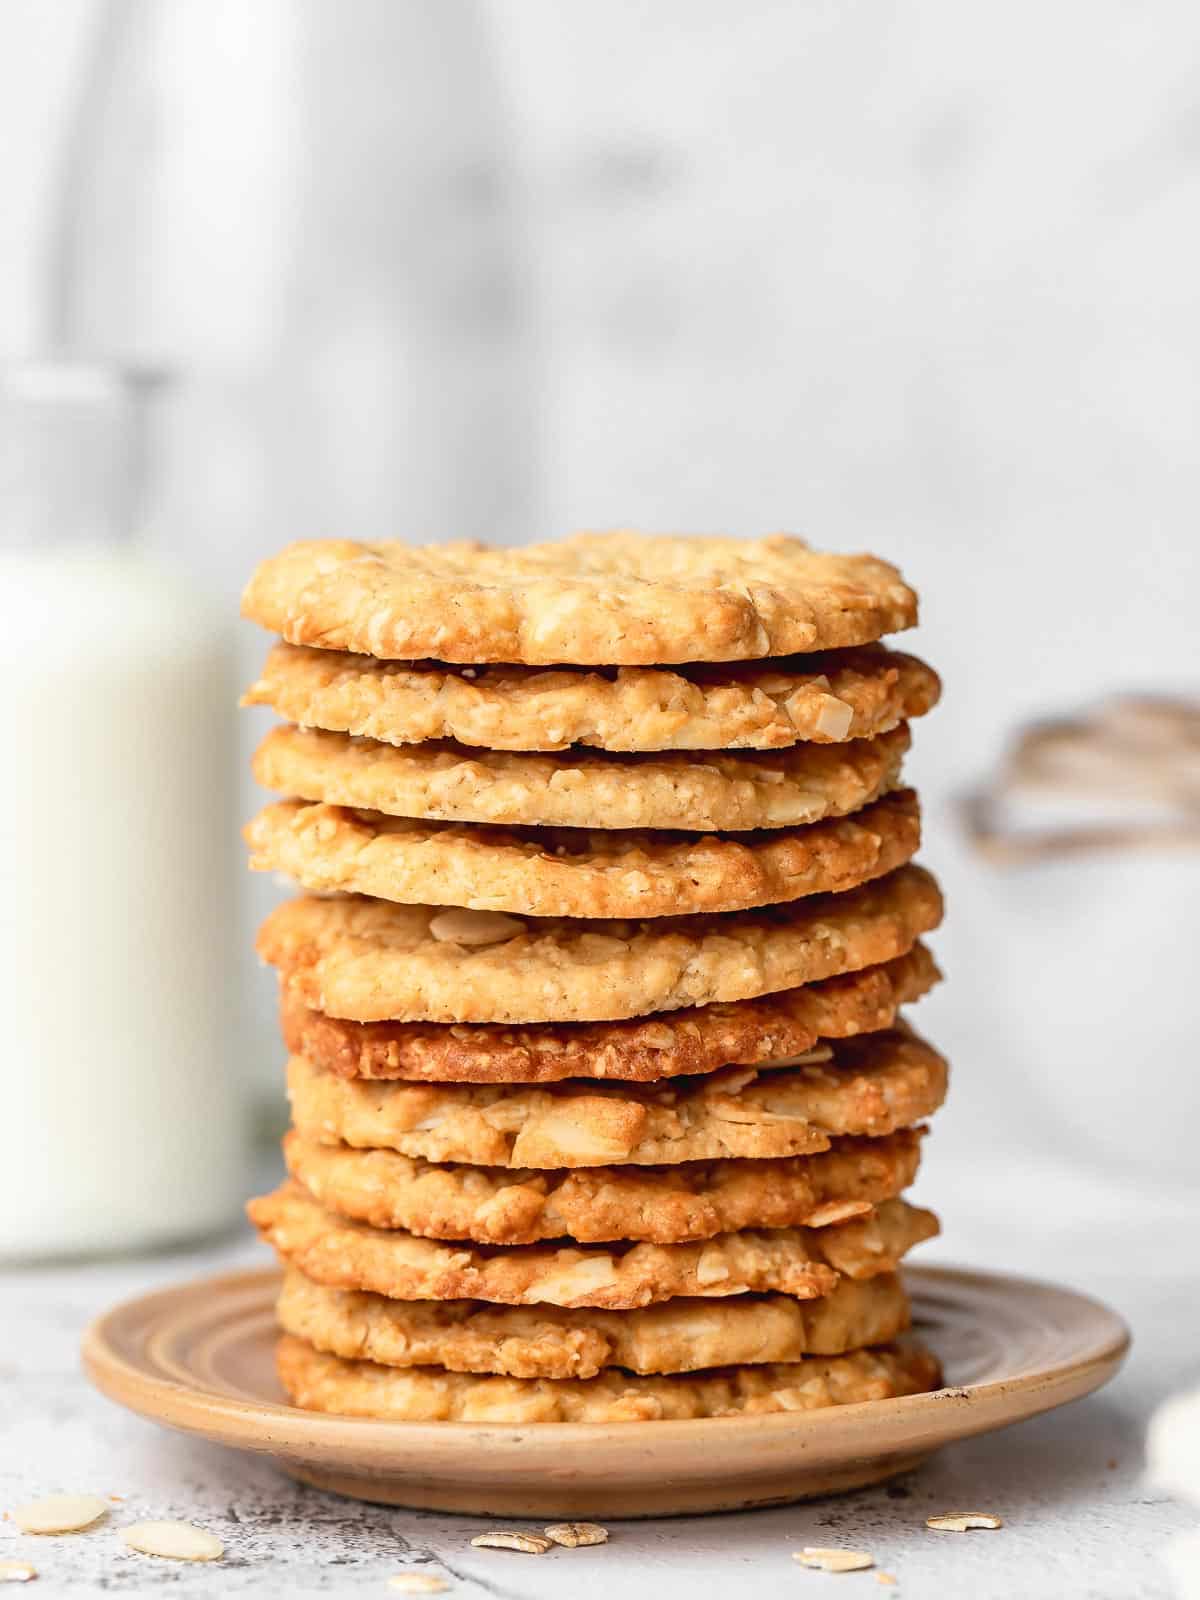 crispy almond oatmeal cookies stacked on a plate